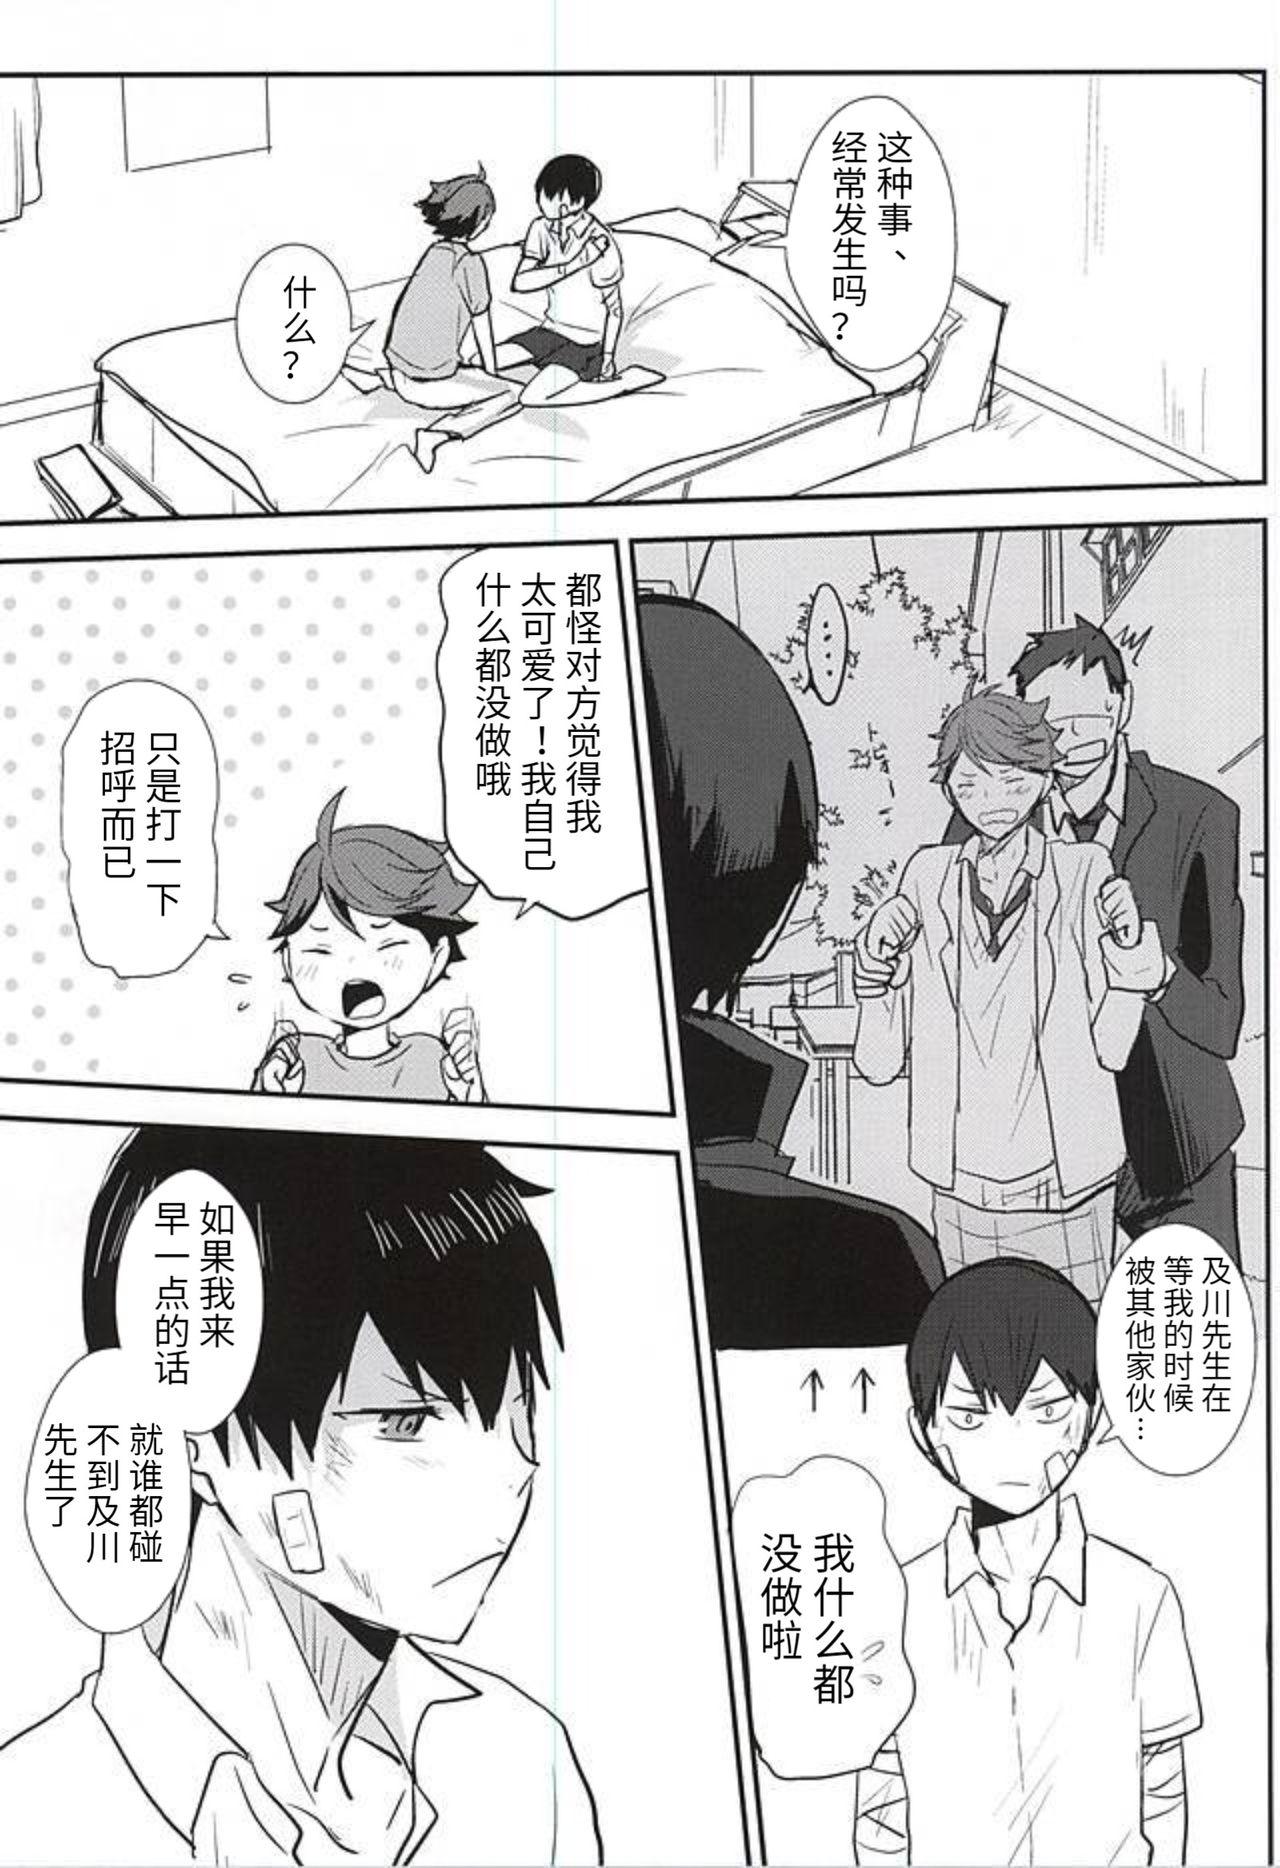 Step 此名为爱 THIS THING CALLED LOVE - Haikyuu Stretching - Page 11